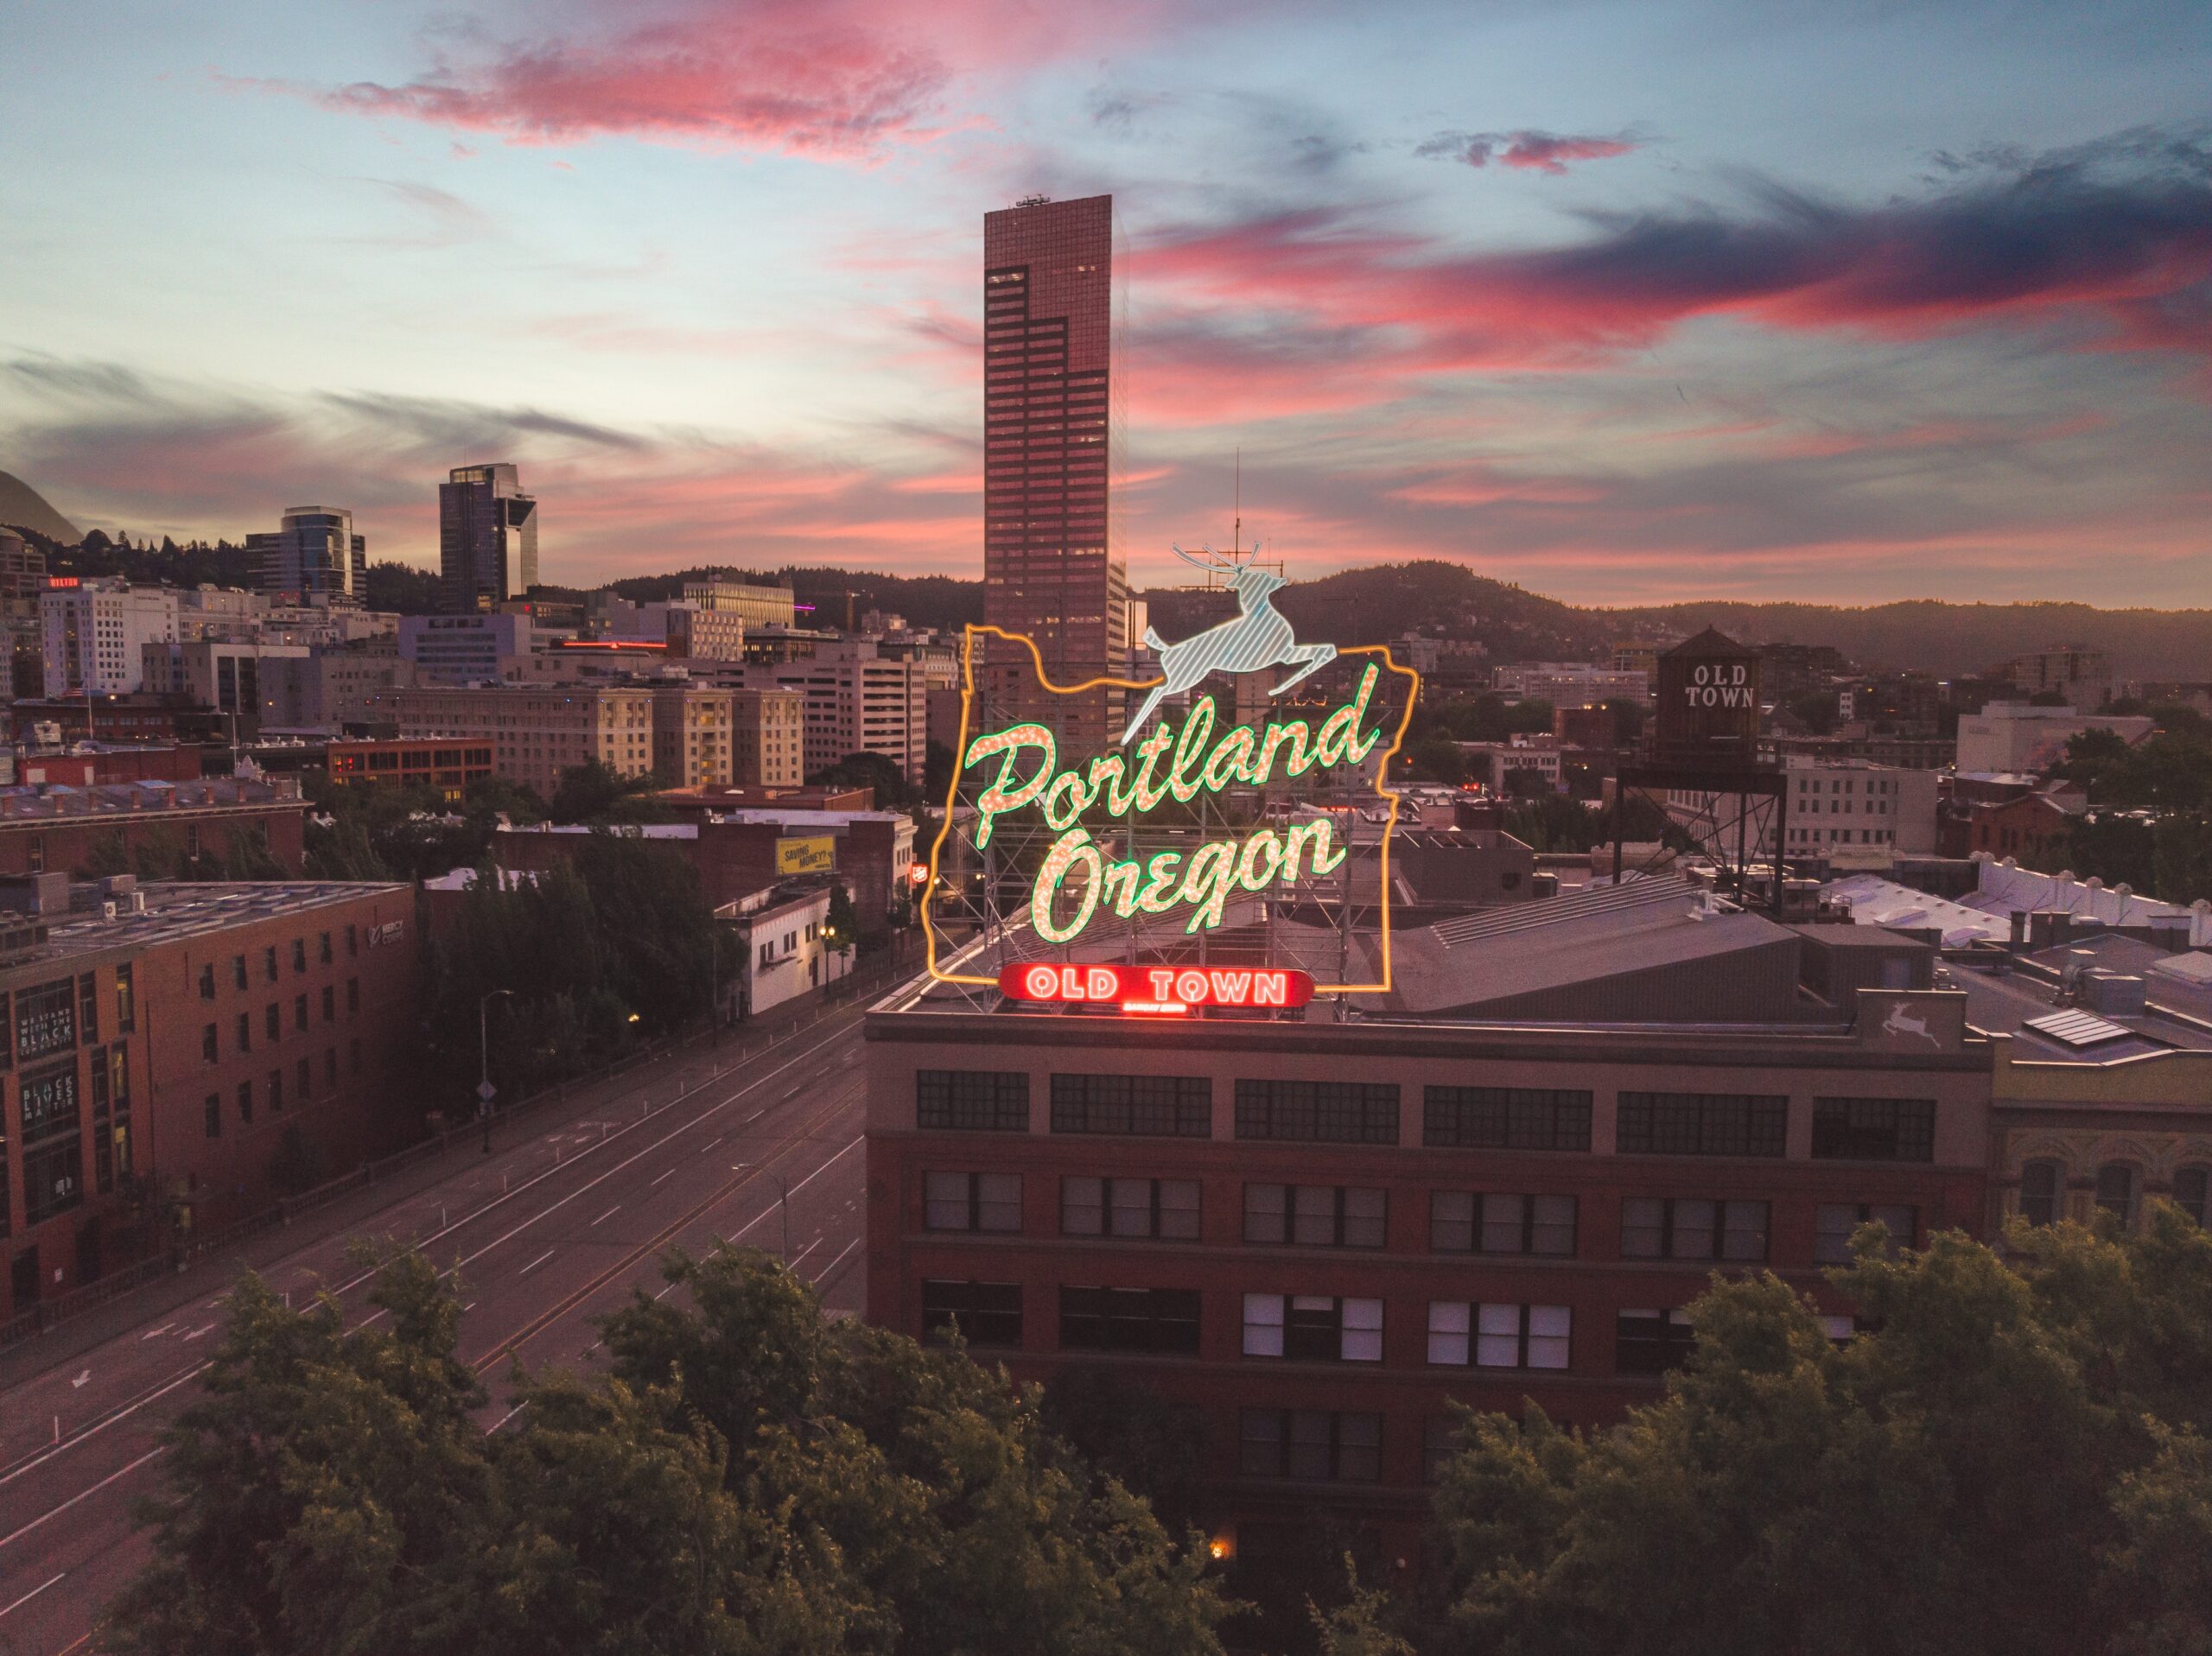 A neon sign highlights Portland, Oregon's Old Town district at dusk.